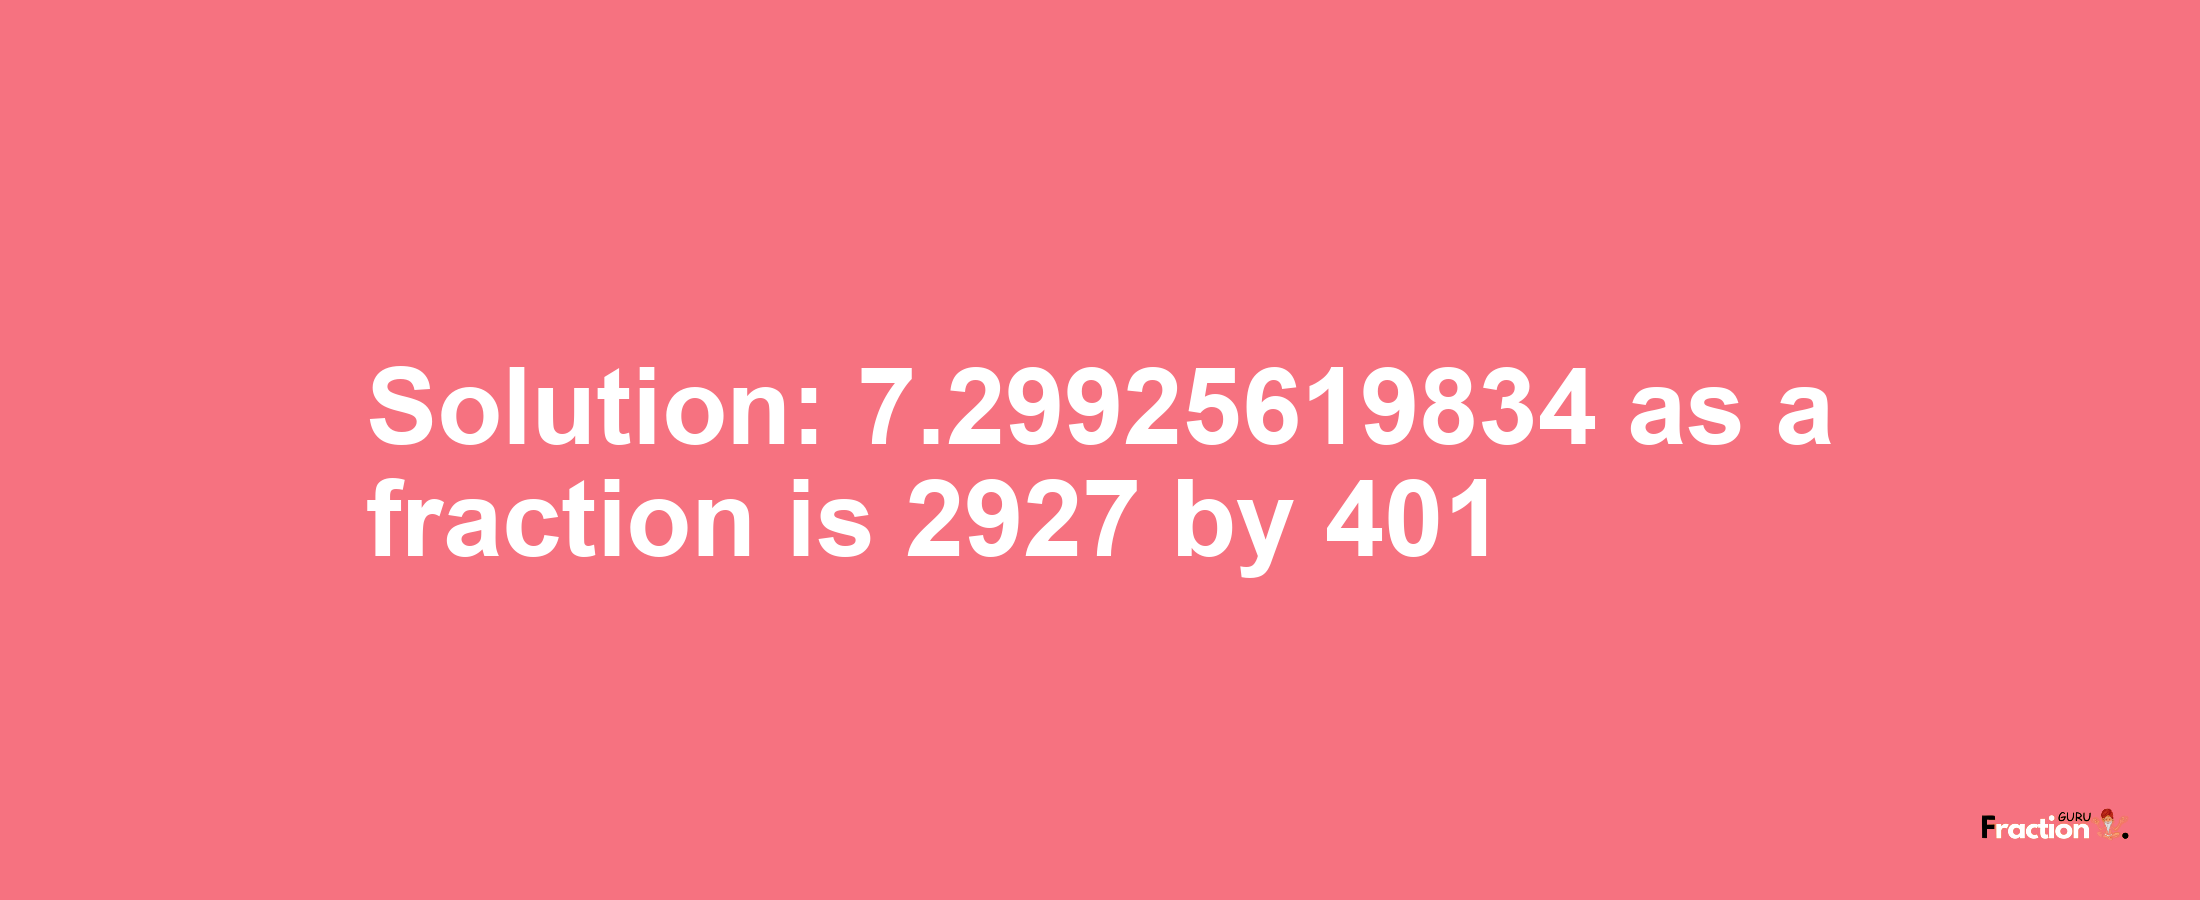 Solution:7.29925619834 as a fraction is 2927/401